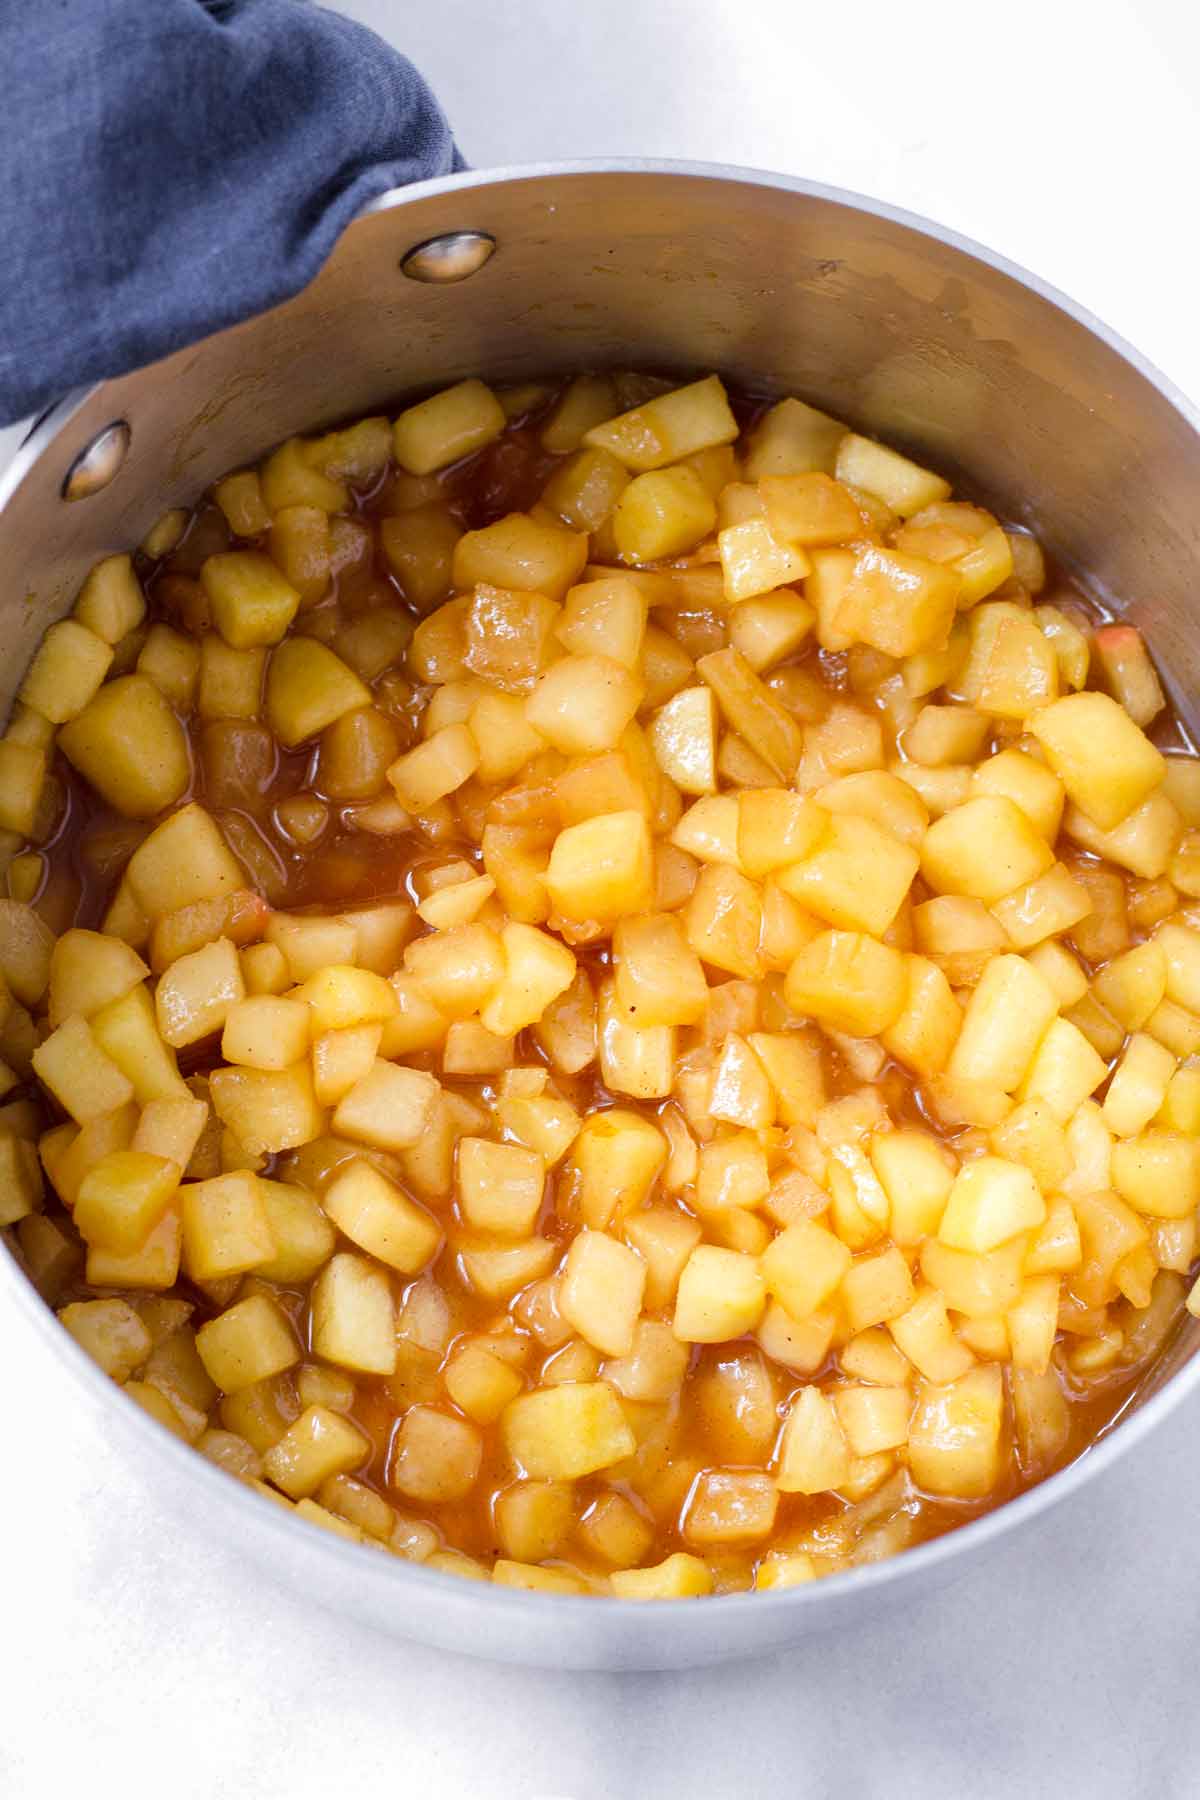 cooked down cinnamon apples for the filling